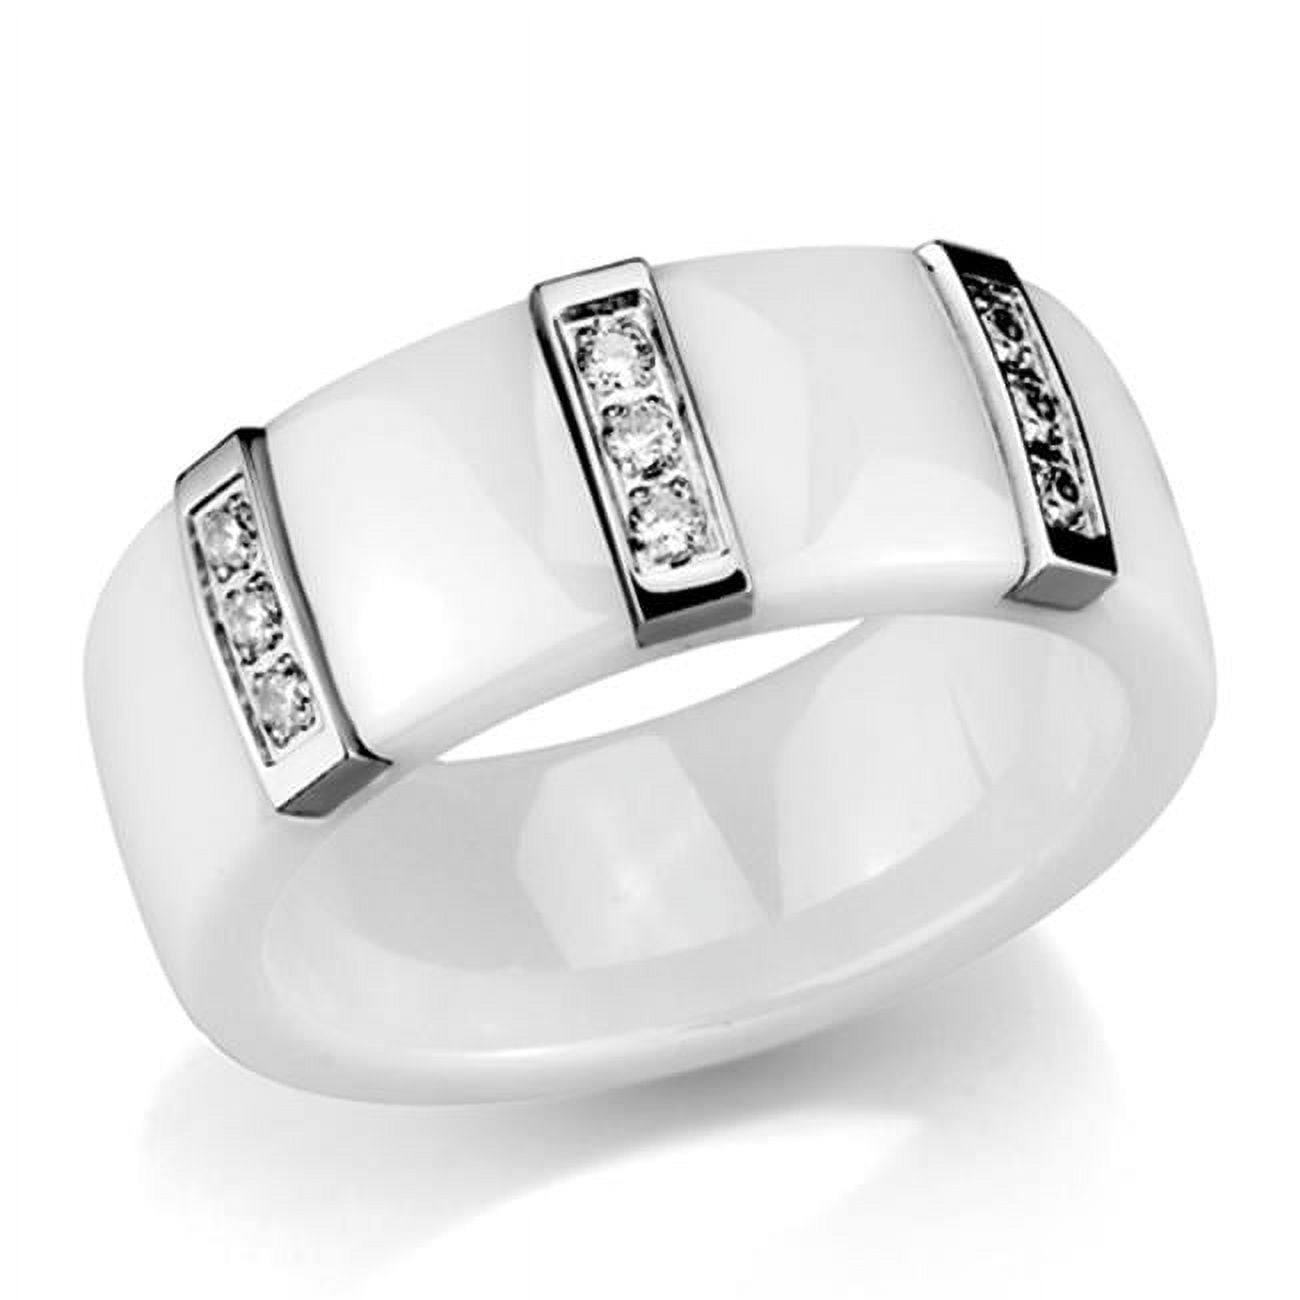 Picture of Alamode 3W957-8 Women High Polished Stainless Steel Ring with Ceramic in White - Size 8